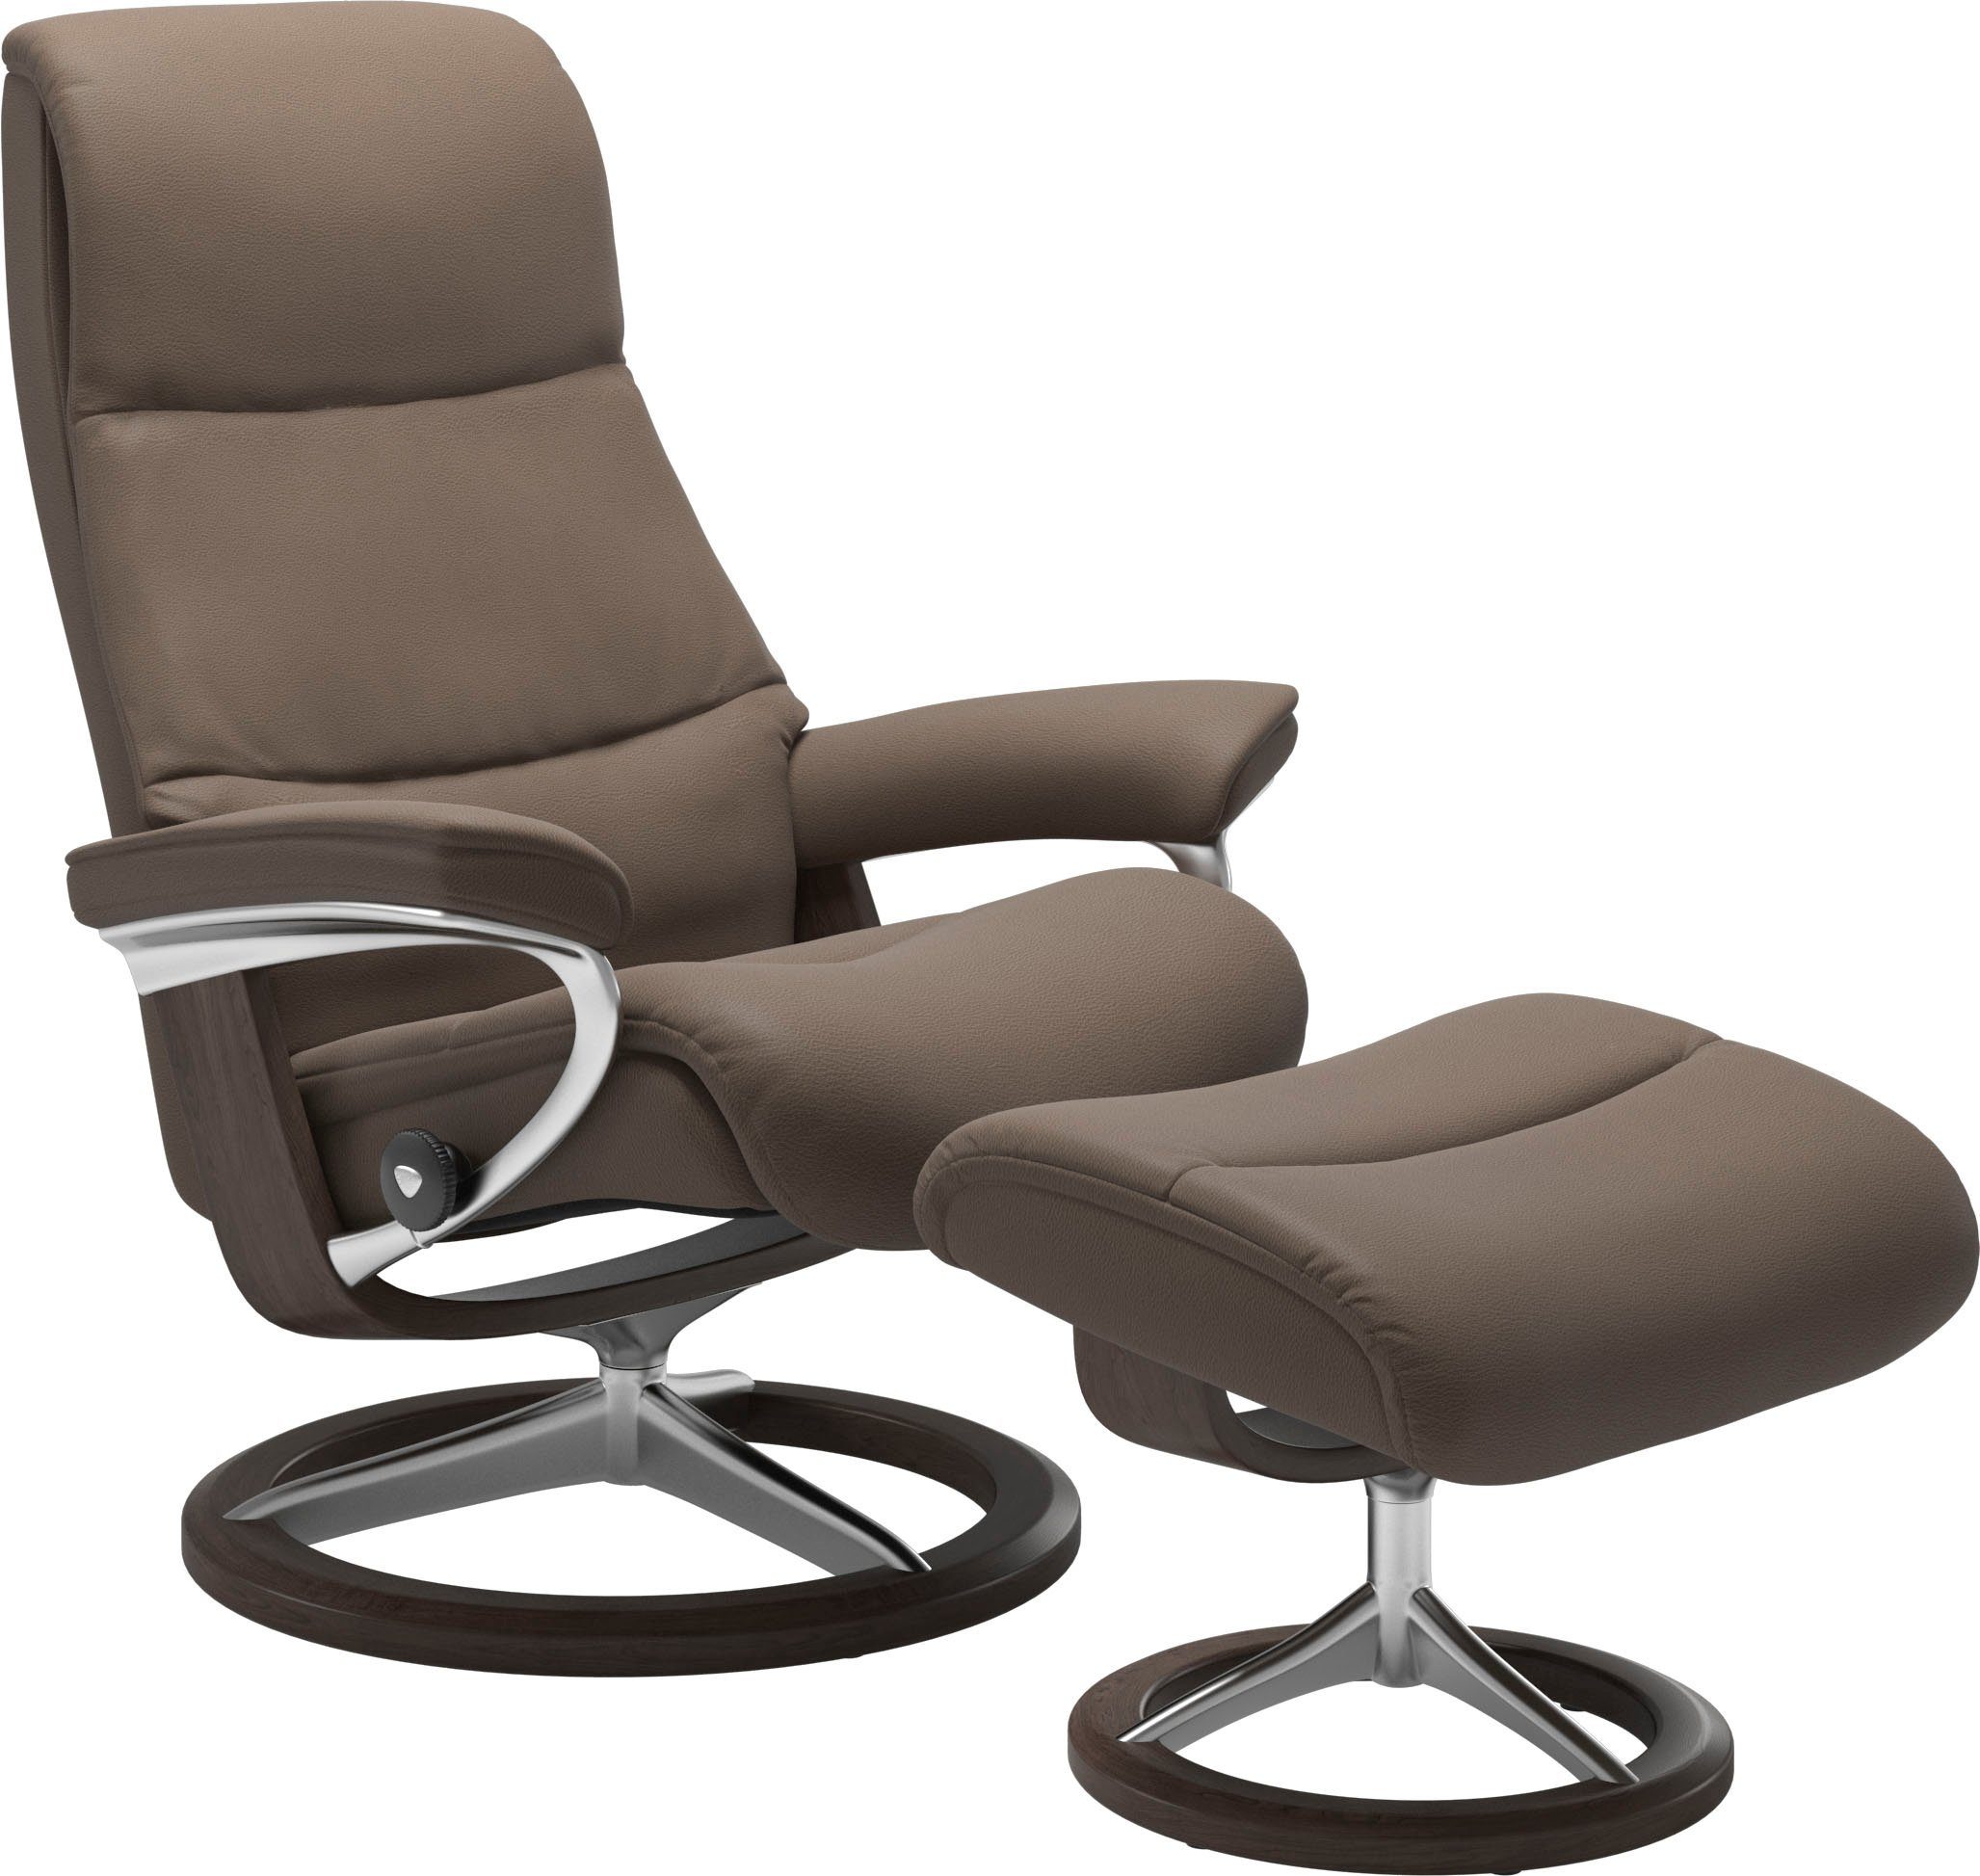 Stressless® Relaxsessel View, mit Signature Base, Größe M,Gestell Wenge | Funktionssessel